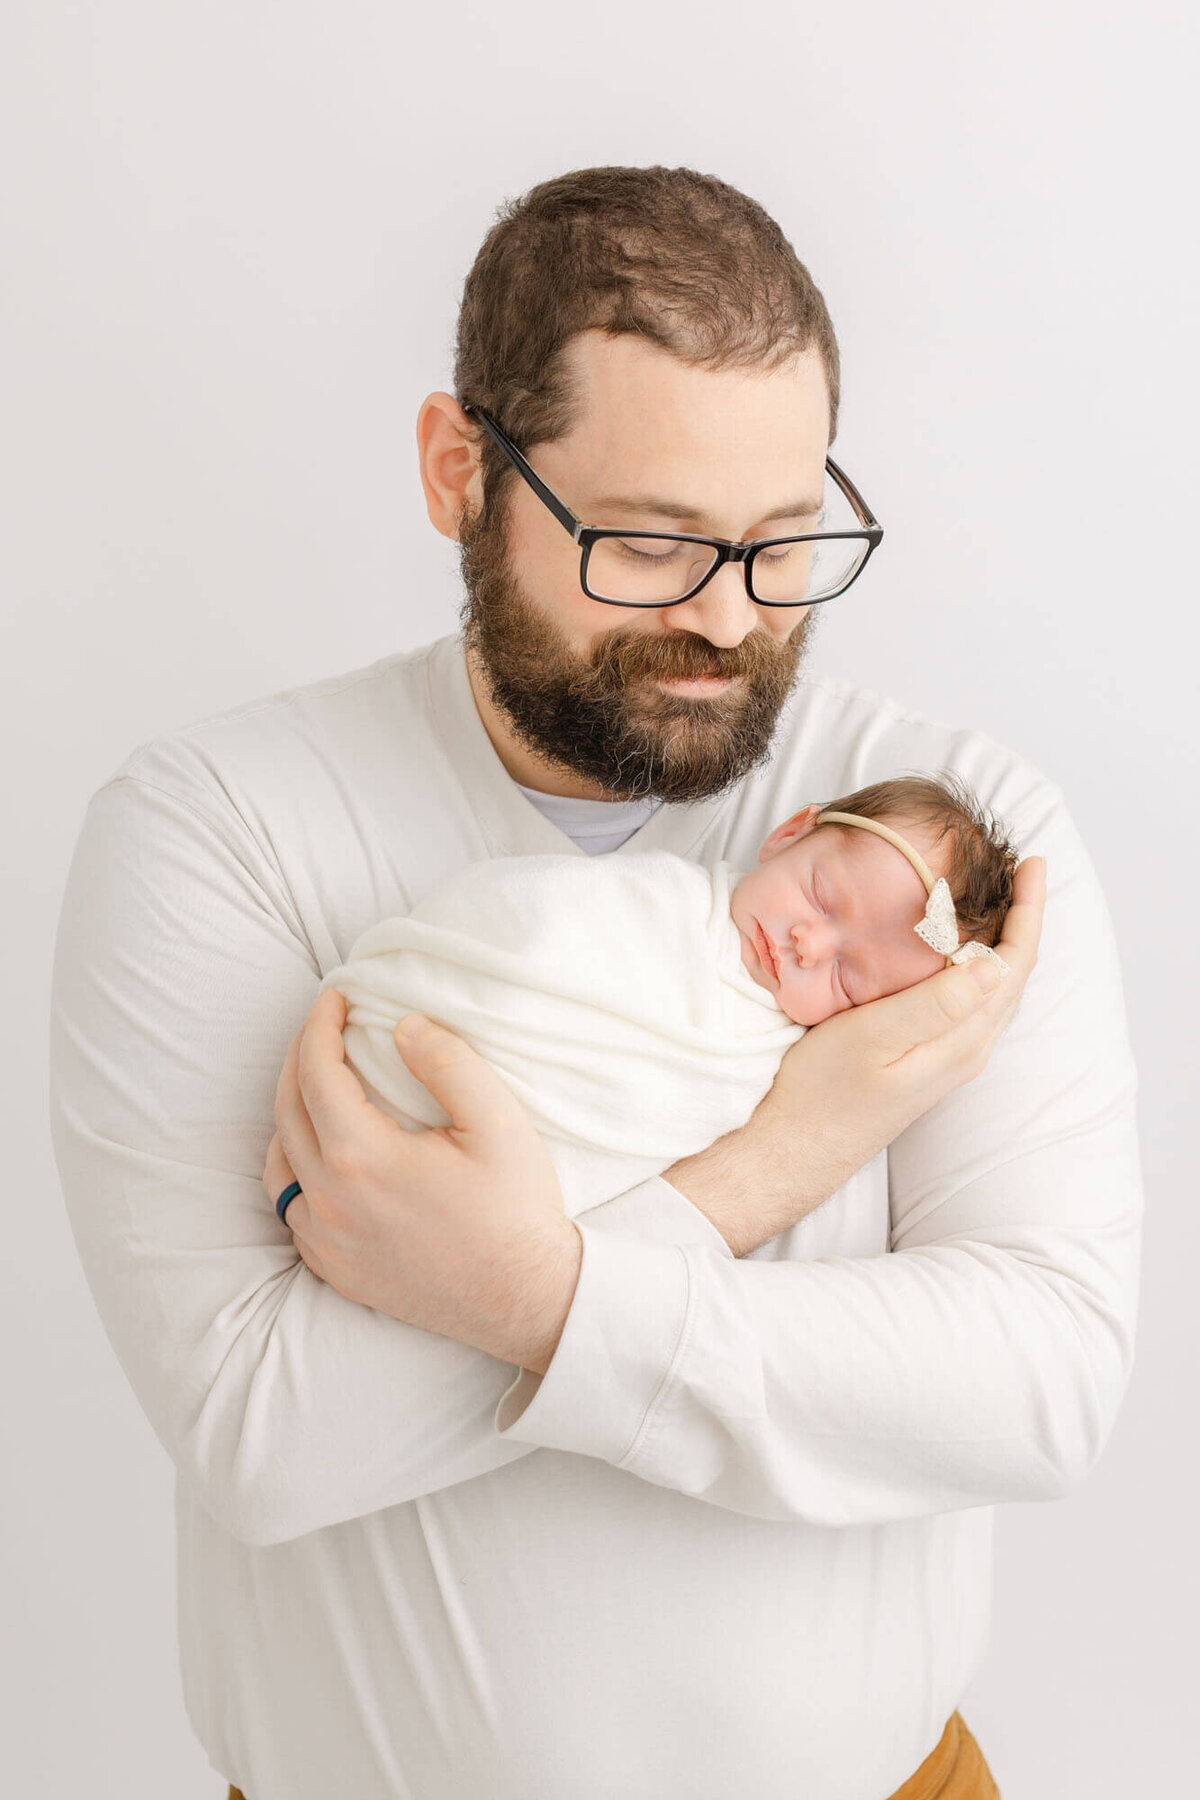 New Dad holding baby in his arms and smiling down at her. He is dressed in white and baby is swaddled in white and wearing a minimalist white headband.